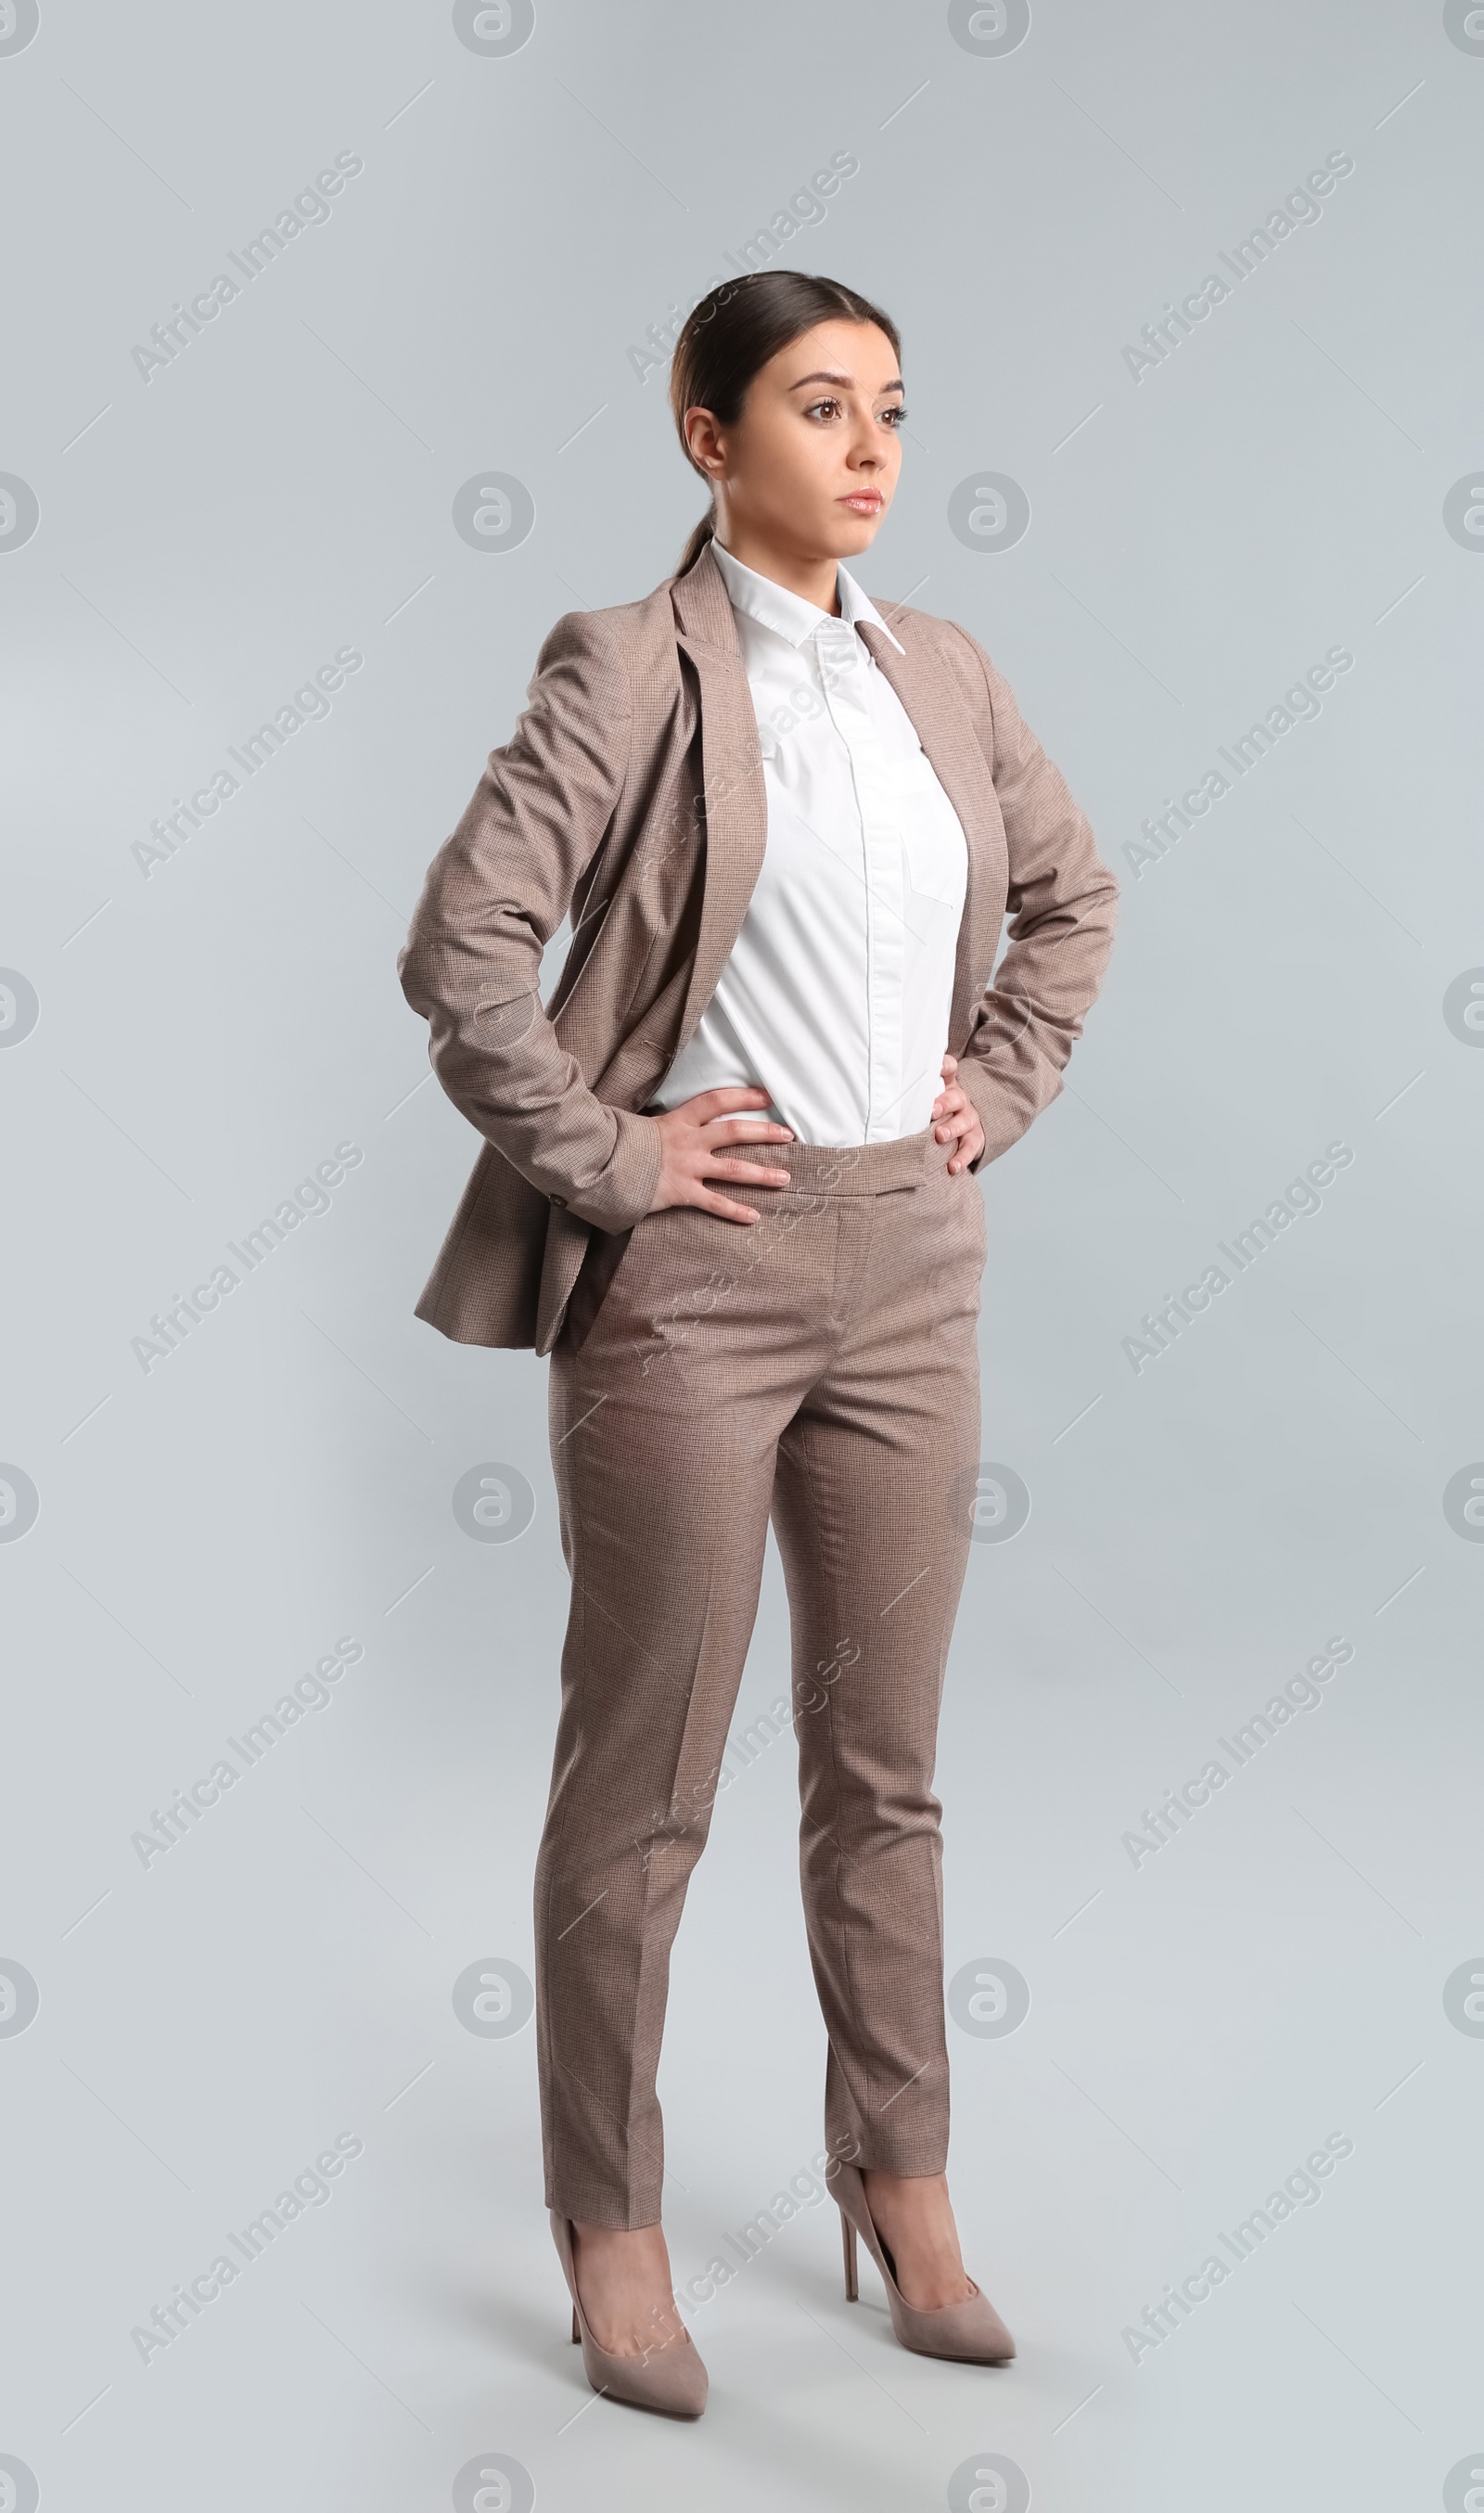 Photo of Full length portrait of young woman on white background